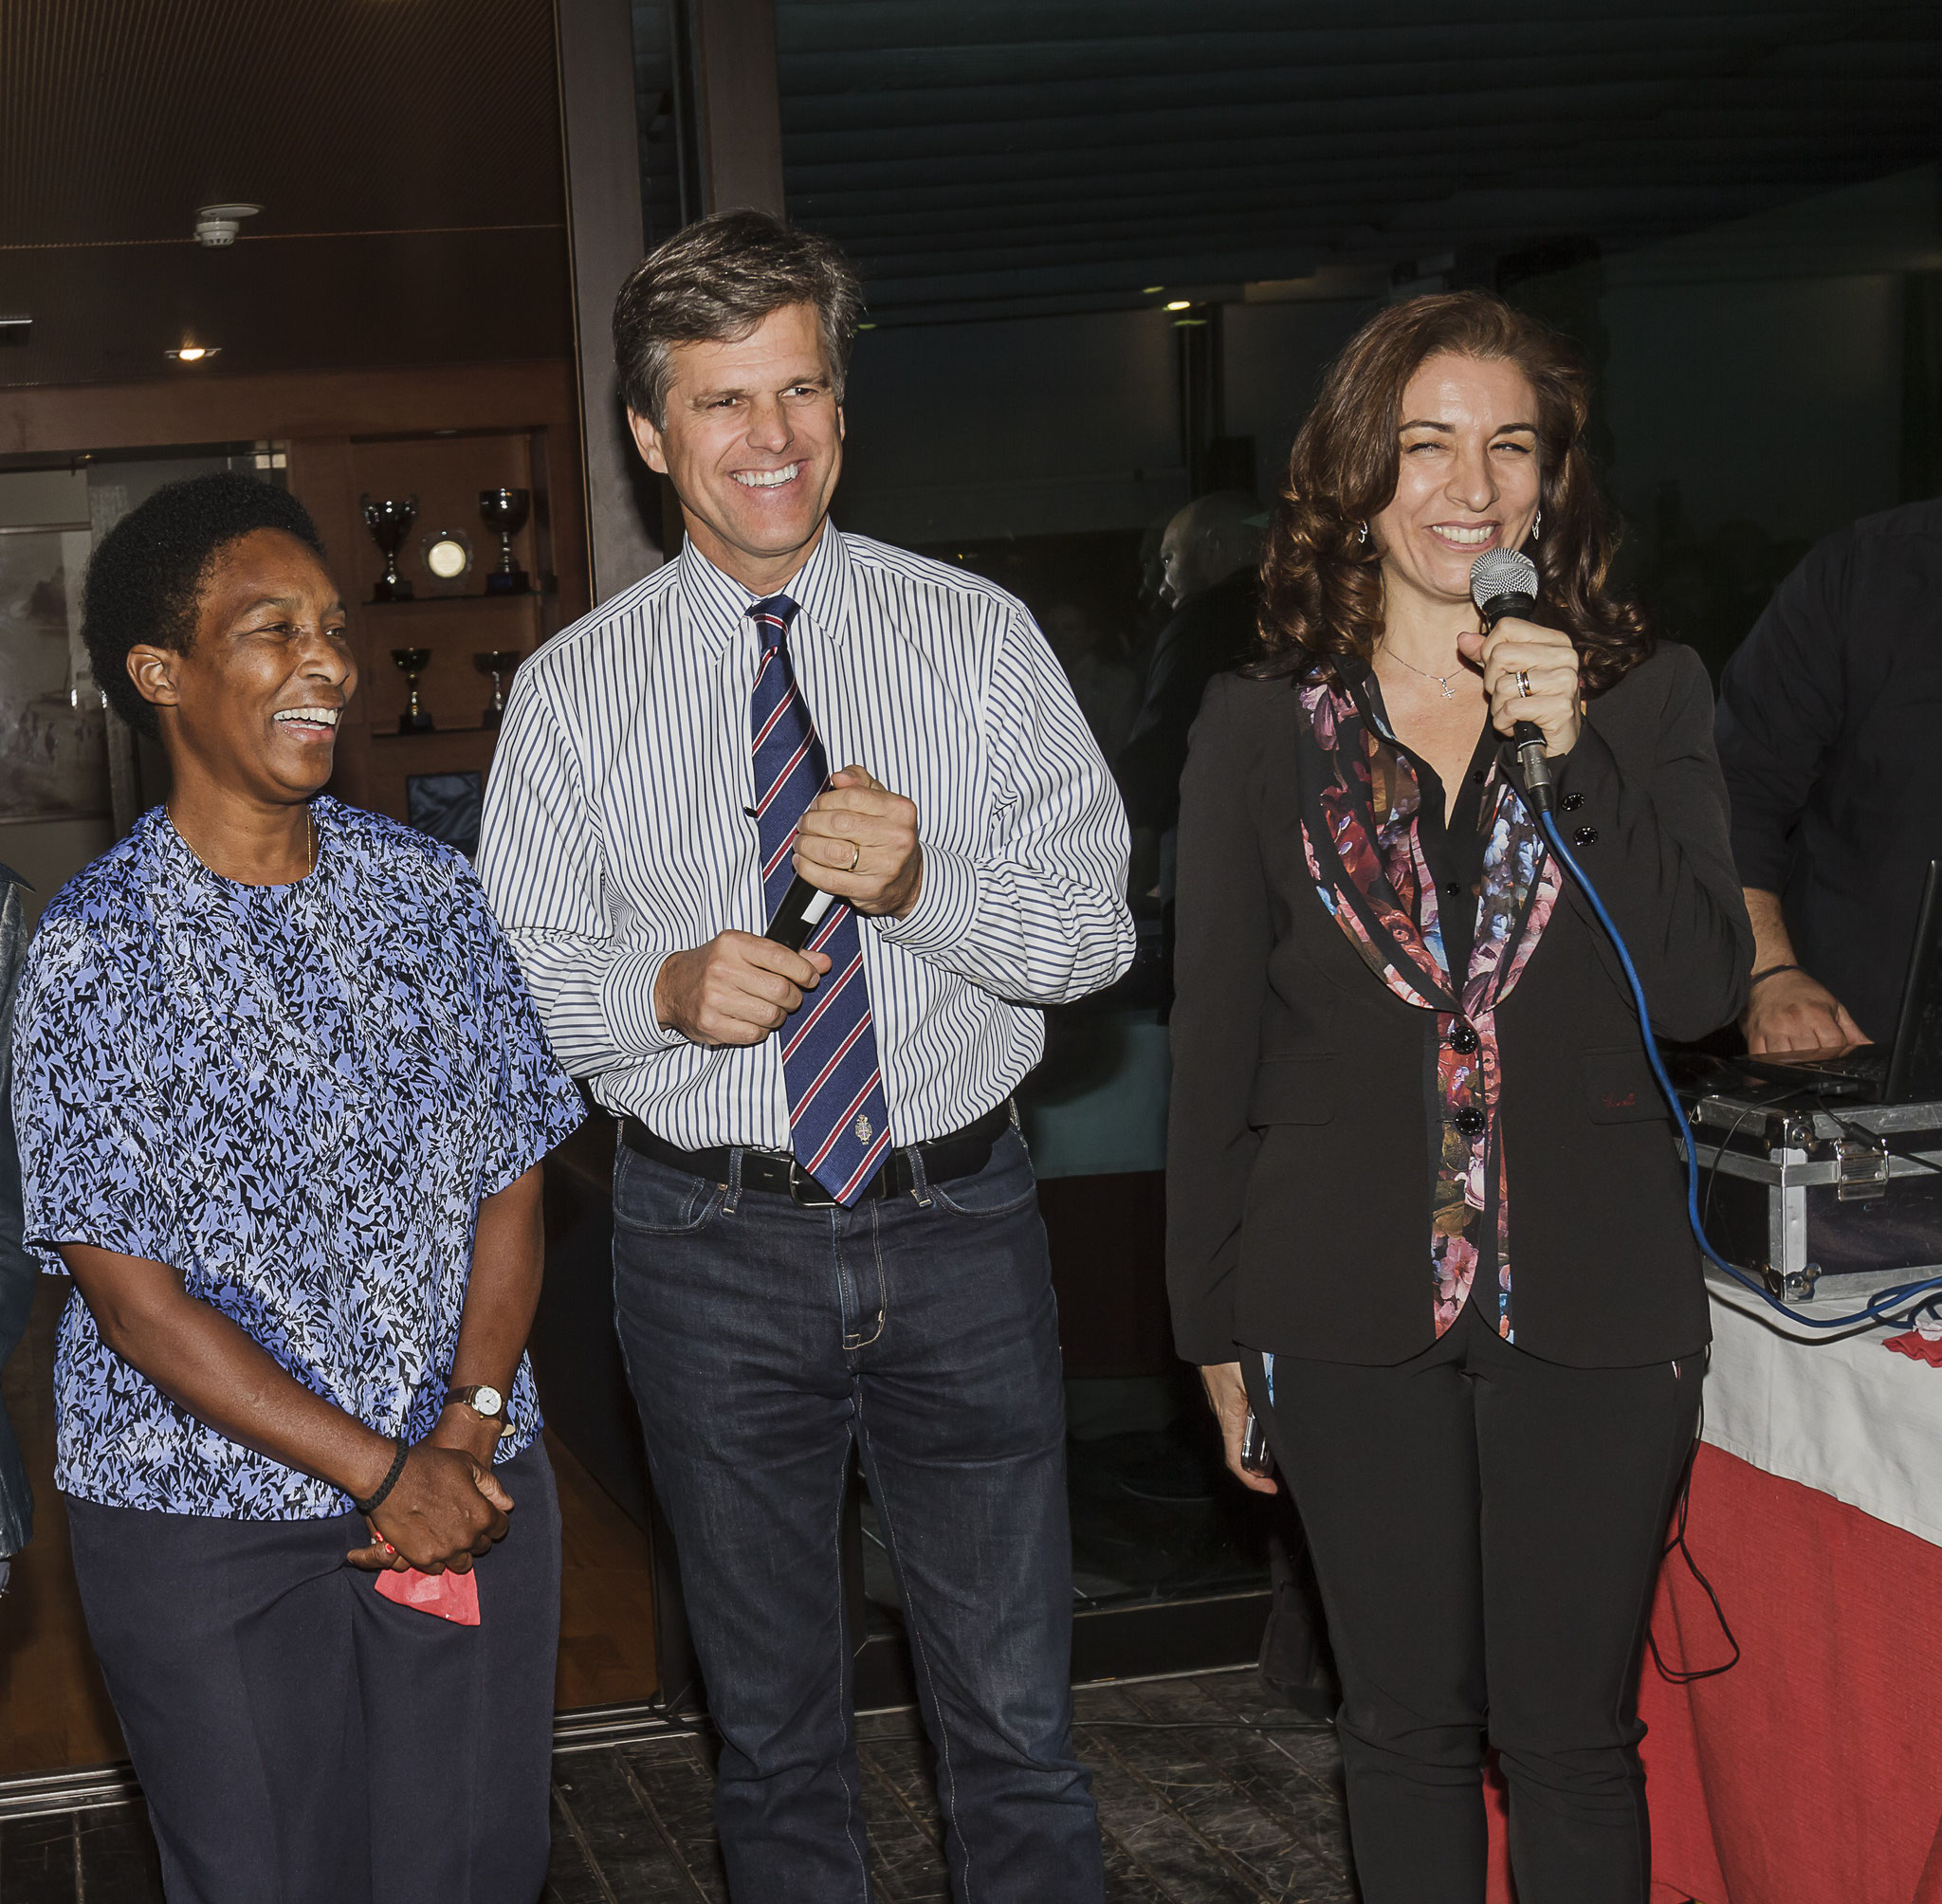 EN/IT consecutive interpreting for Special Olympics with the CEO Timothy Shriver and Loretta Claiborne - Rome 4 Oct 2016